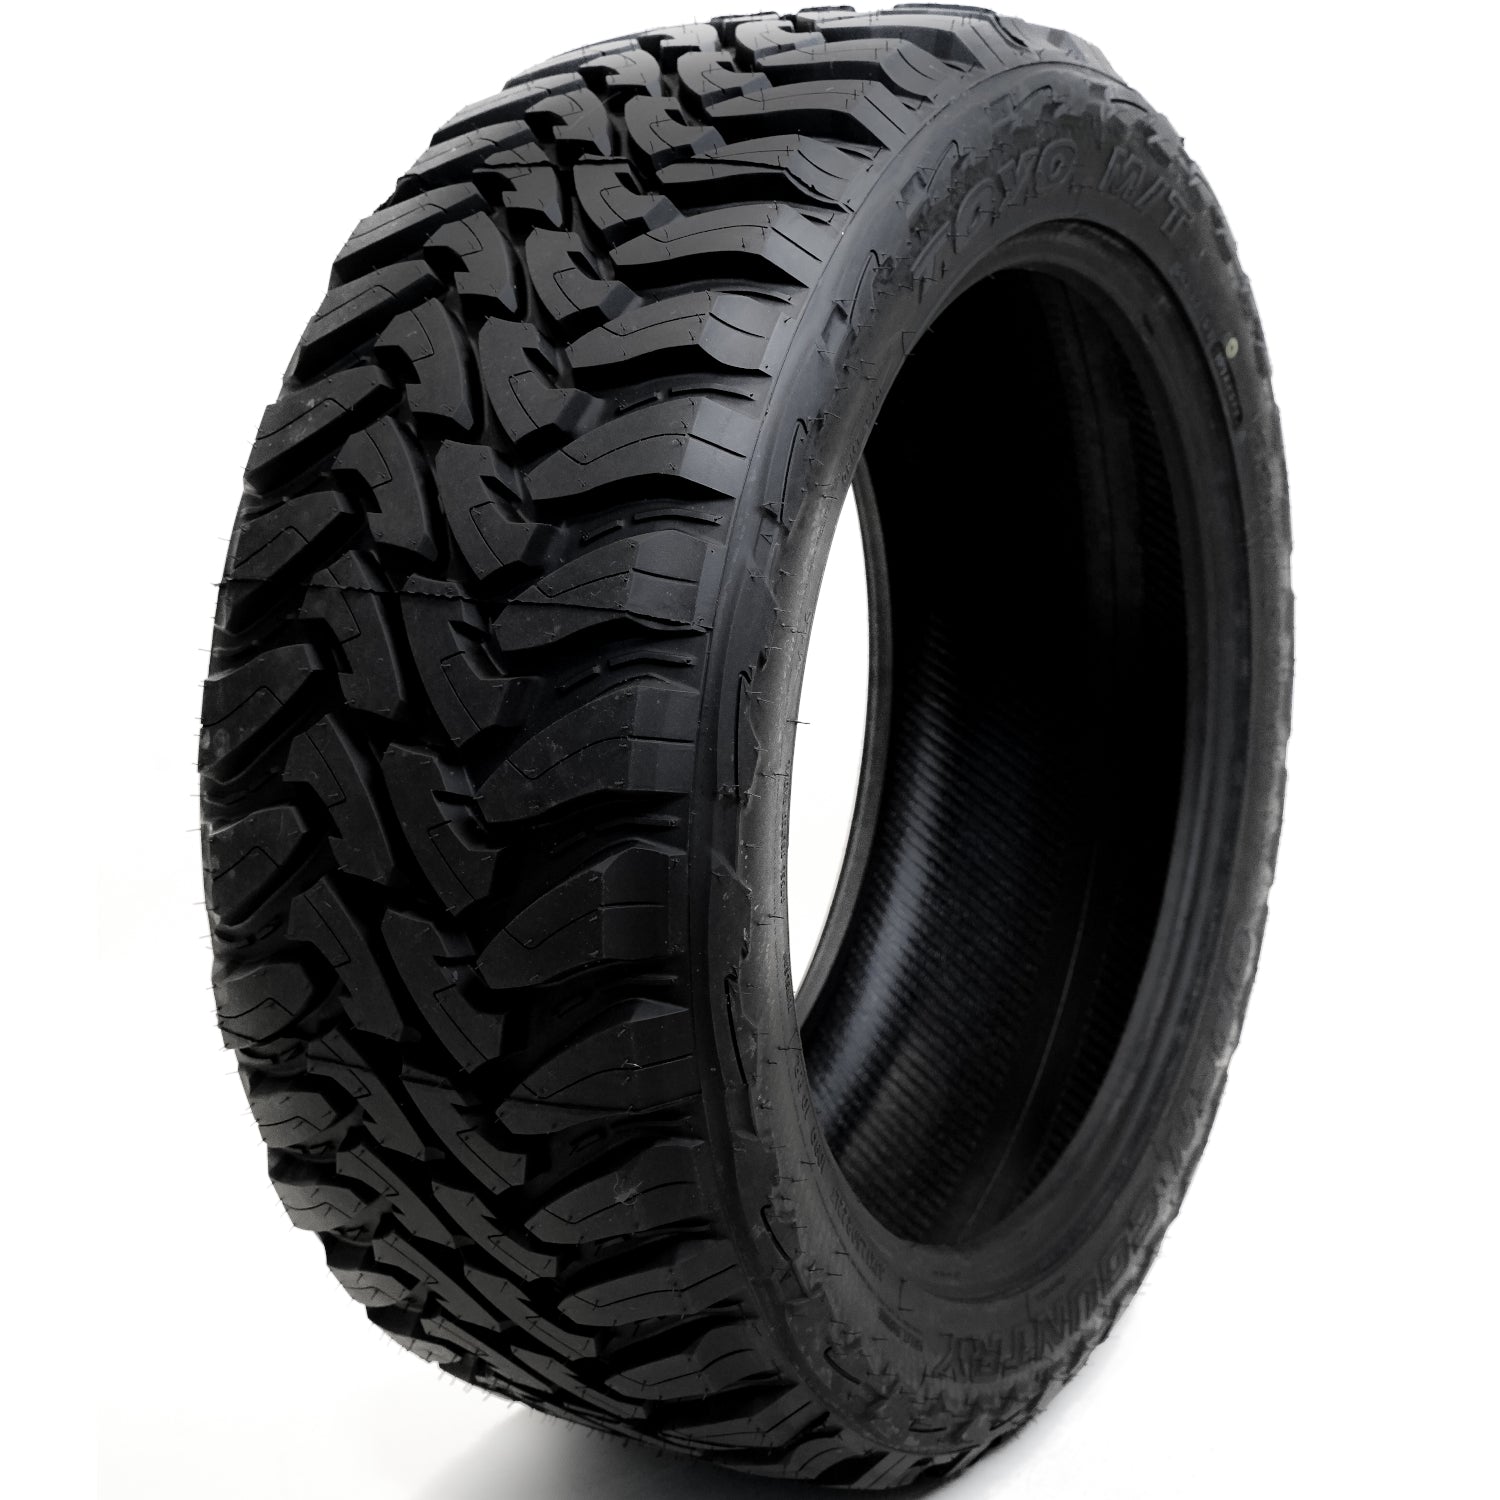 TOYO TIRES OPEN COUNTRY M/T 38X13.50R18LT Tires